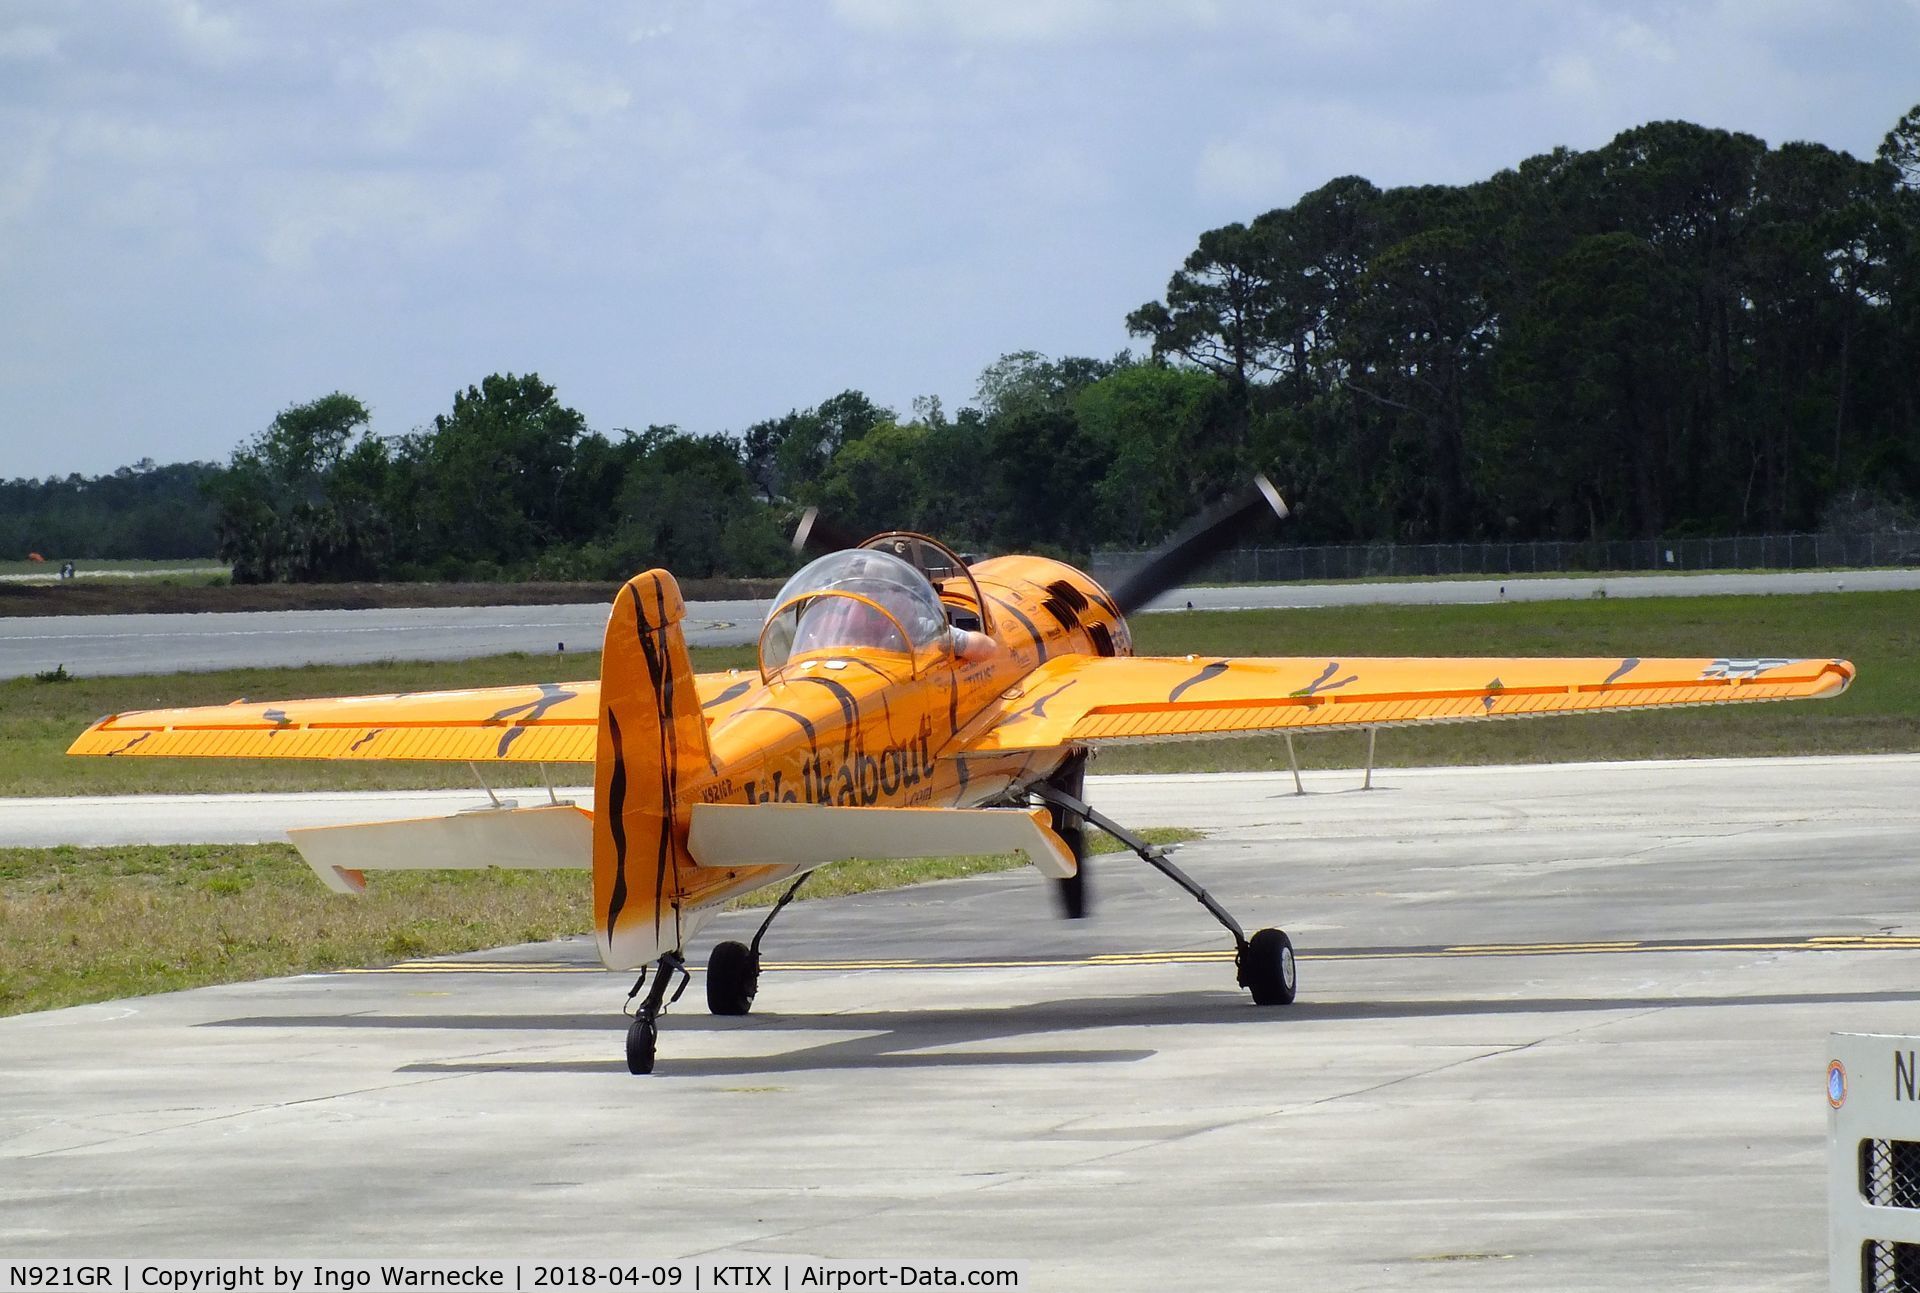 N921GR, 1993 Yakovlev Yak-55M C/N 930809, Yakovlev Yak-55M at Space Coast Regional Airport, Titusville (the day after Space Coast Warbird AirShow 2018)